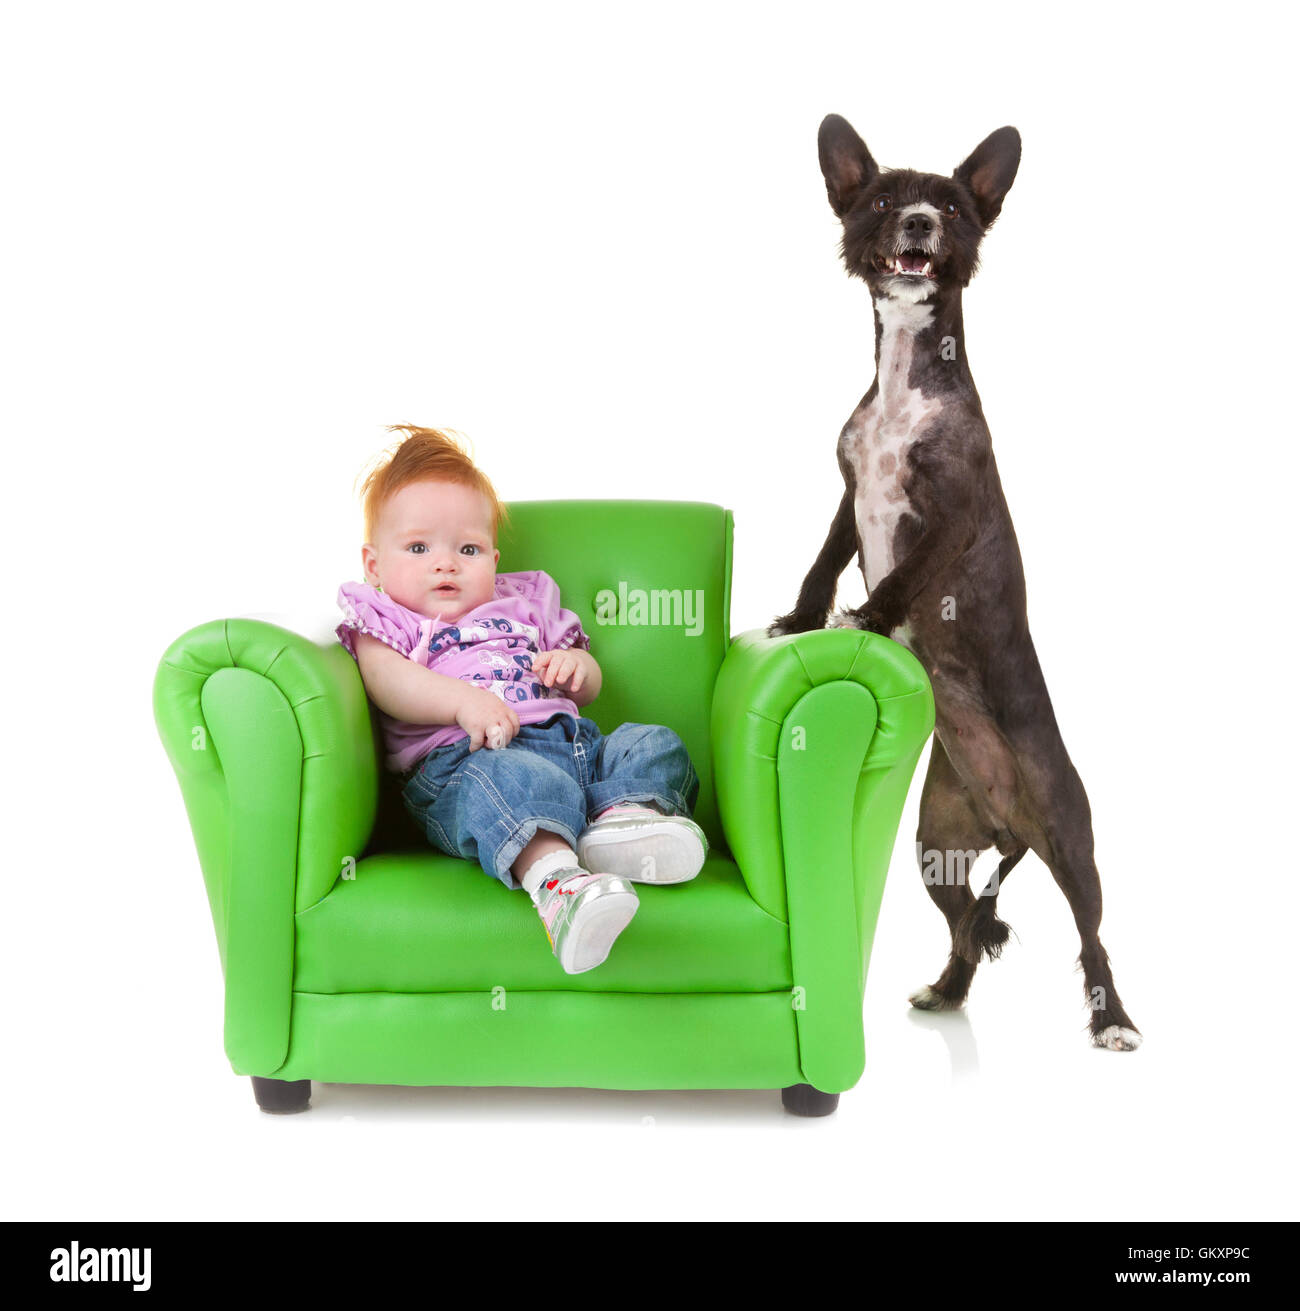 Toddler sitting on a green armchair with a little black dog. Stock Photo